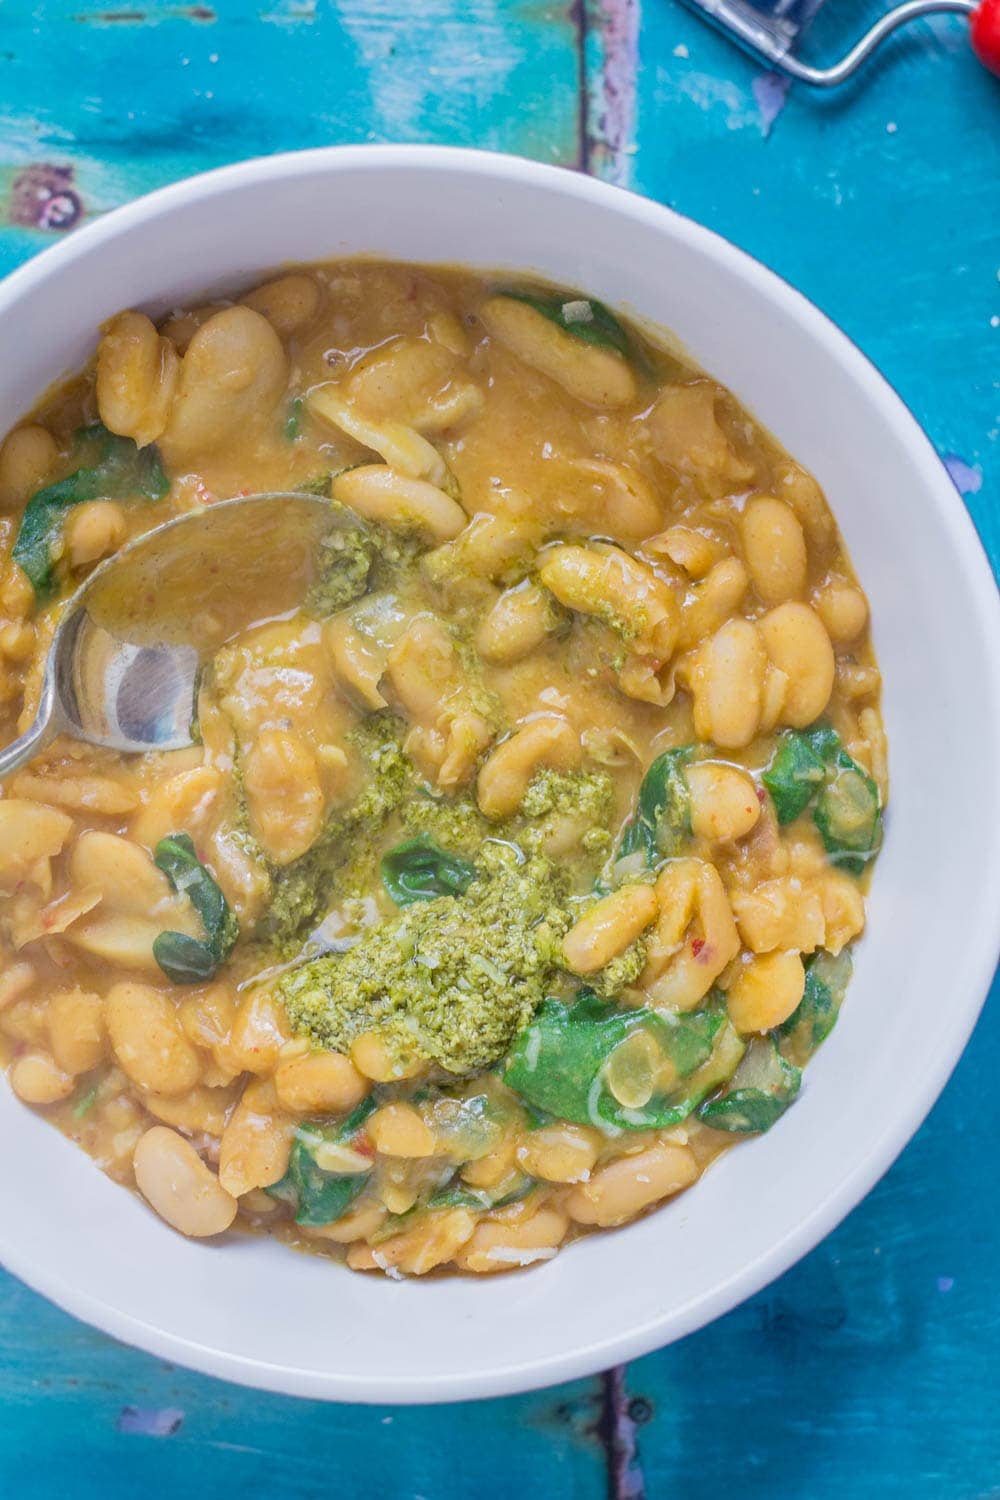 Beans are cooked with bacon, garlic & chicken stock to make this tasty white bean stew. Topped with a homemade pesto for a comforting winter dinner.